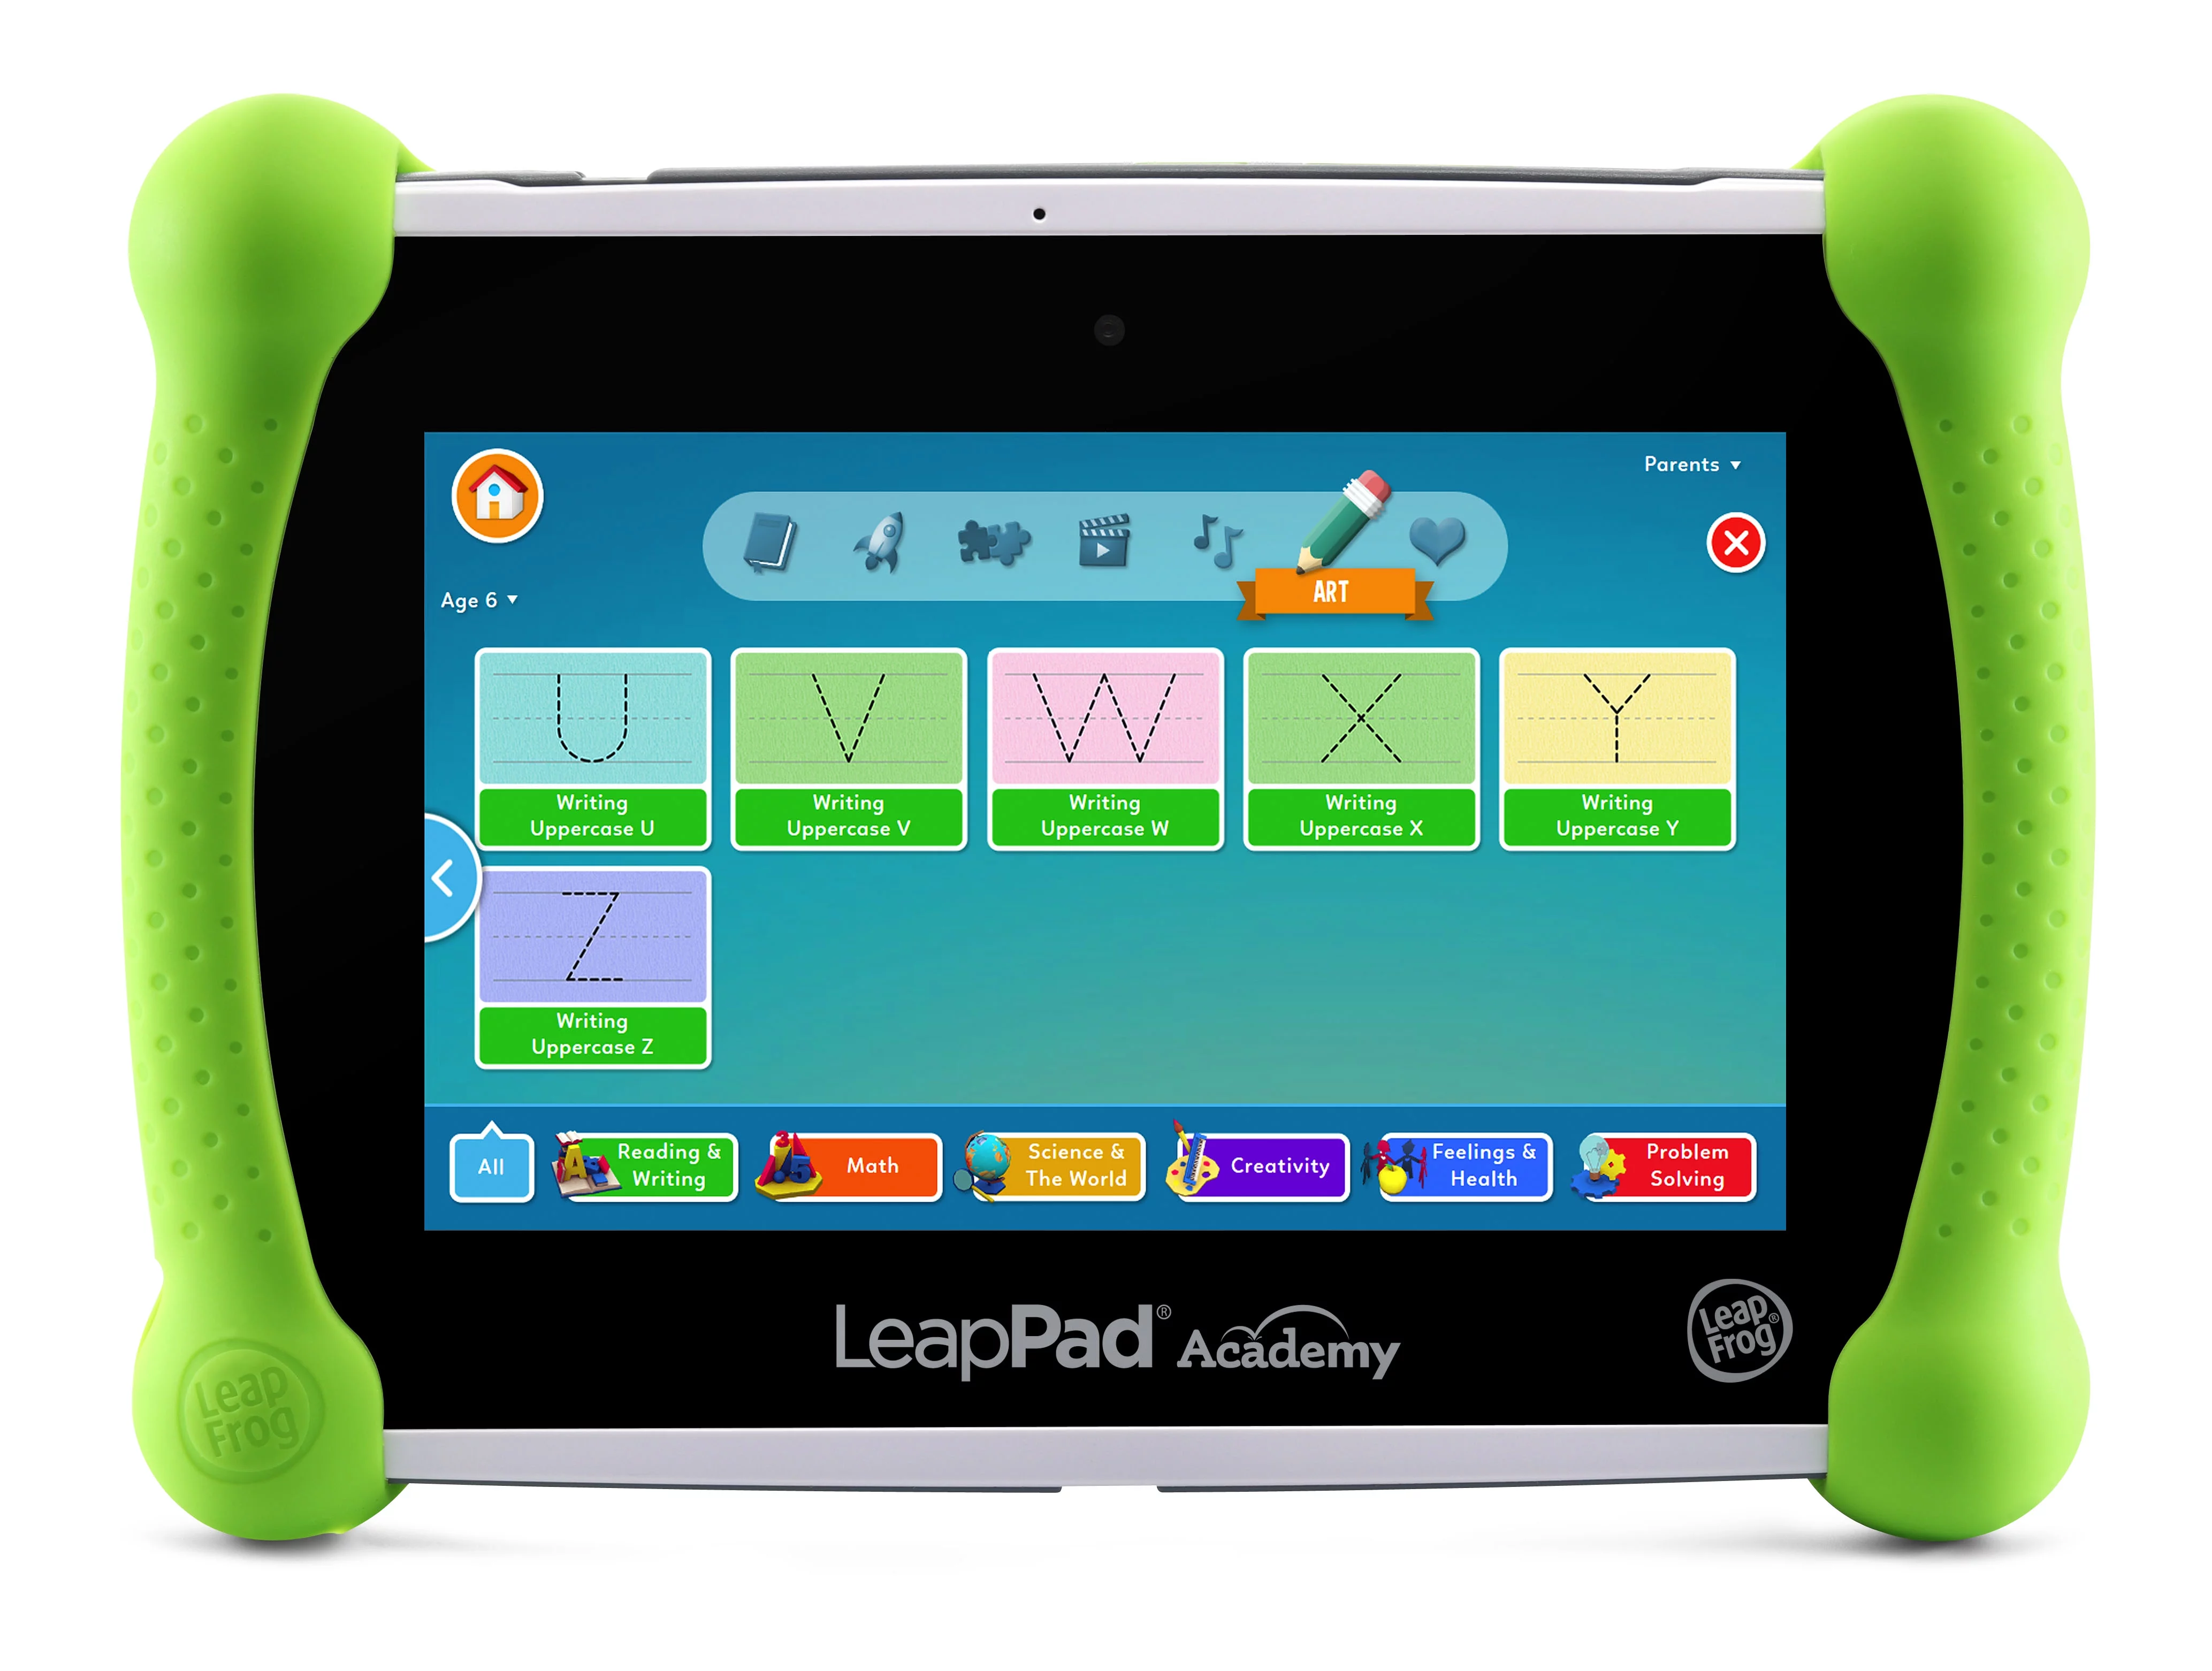 LeapFrog® LeapPad® Academy, Electronic Learning Tablet for Kids, Teaches Education, Creativity